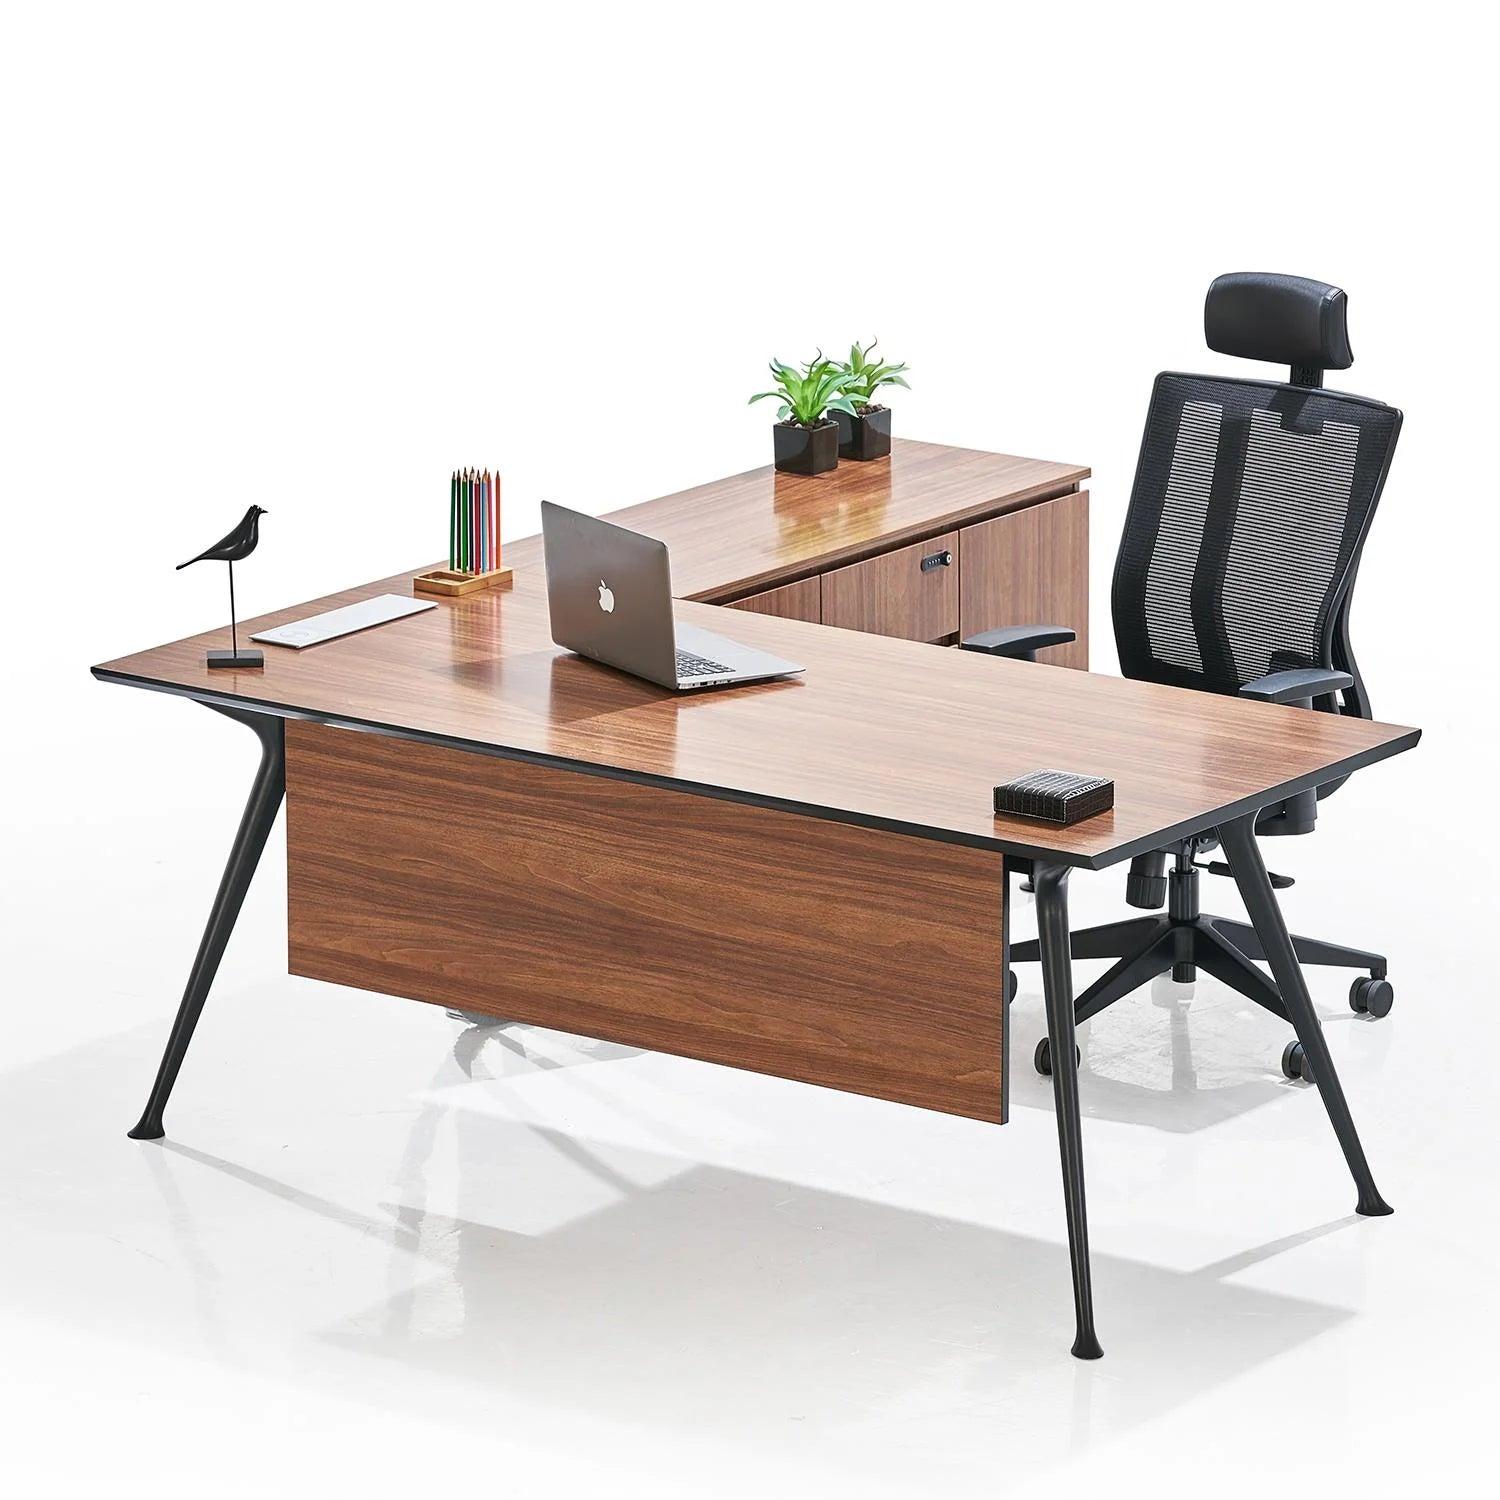 Executive Table Allure Series with side storage options in Mumbai by Woodware